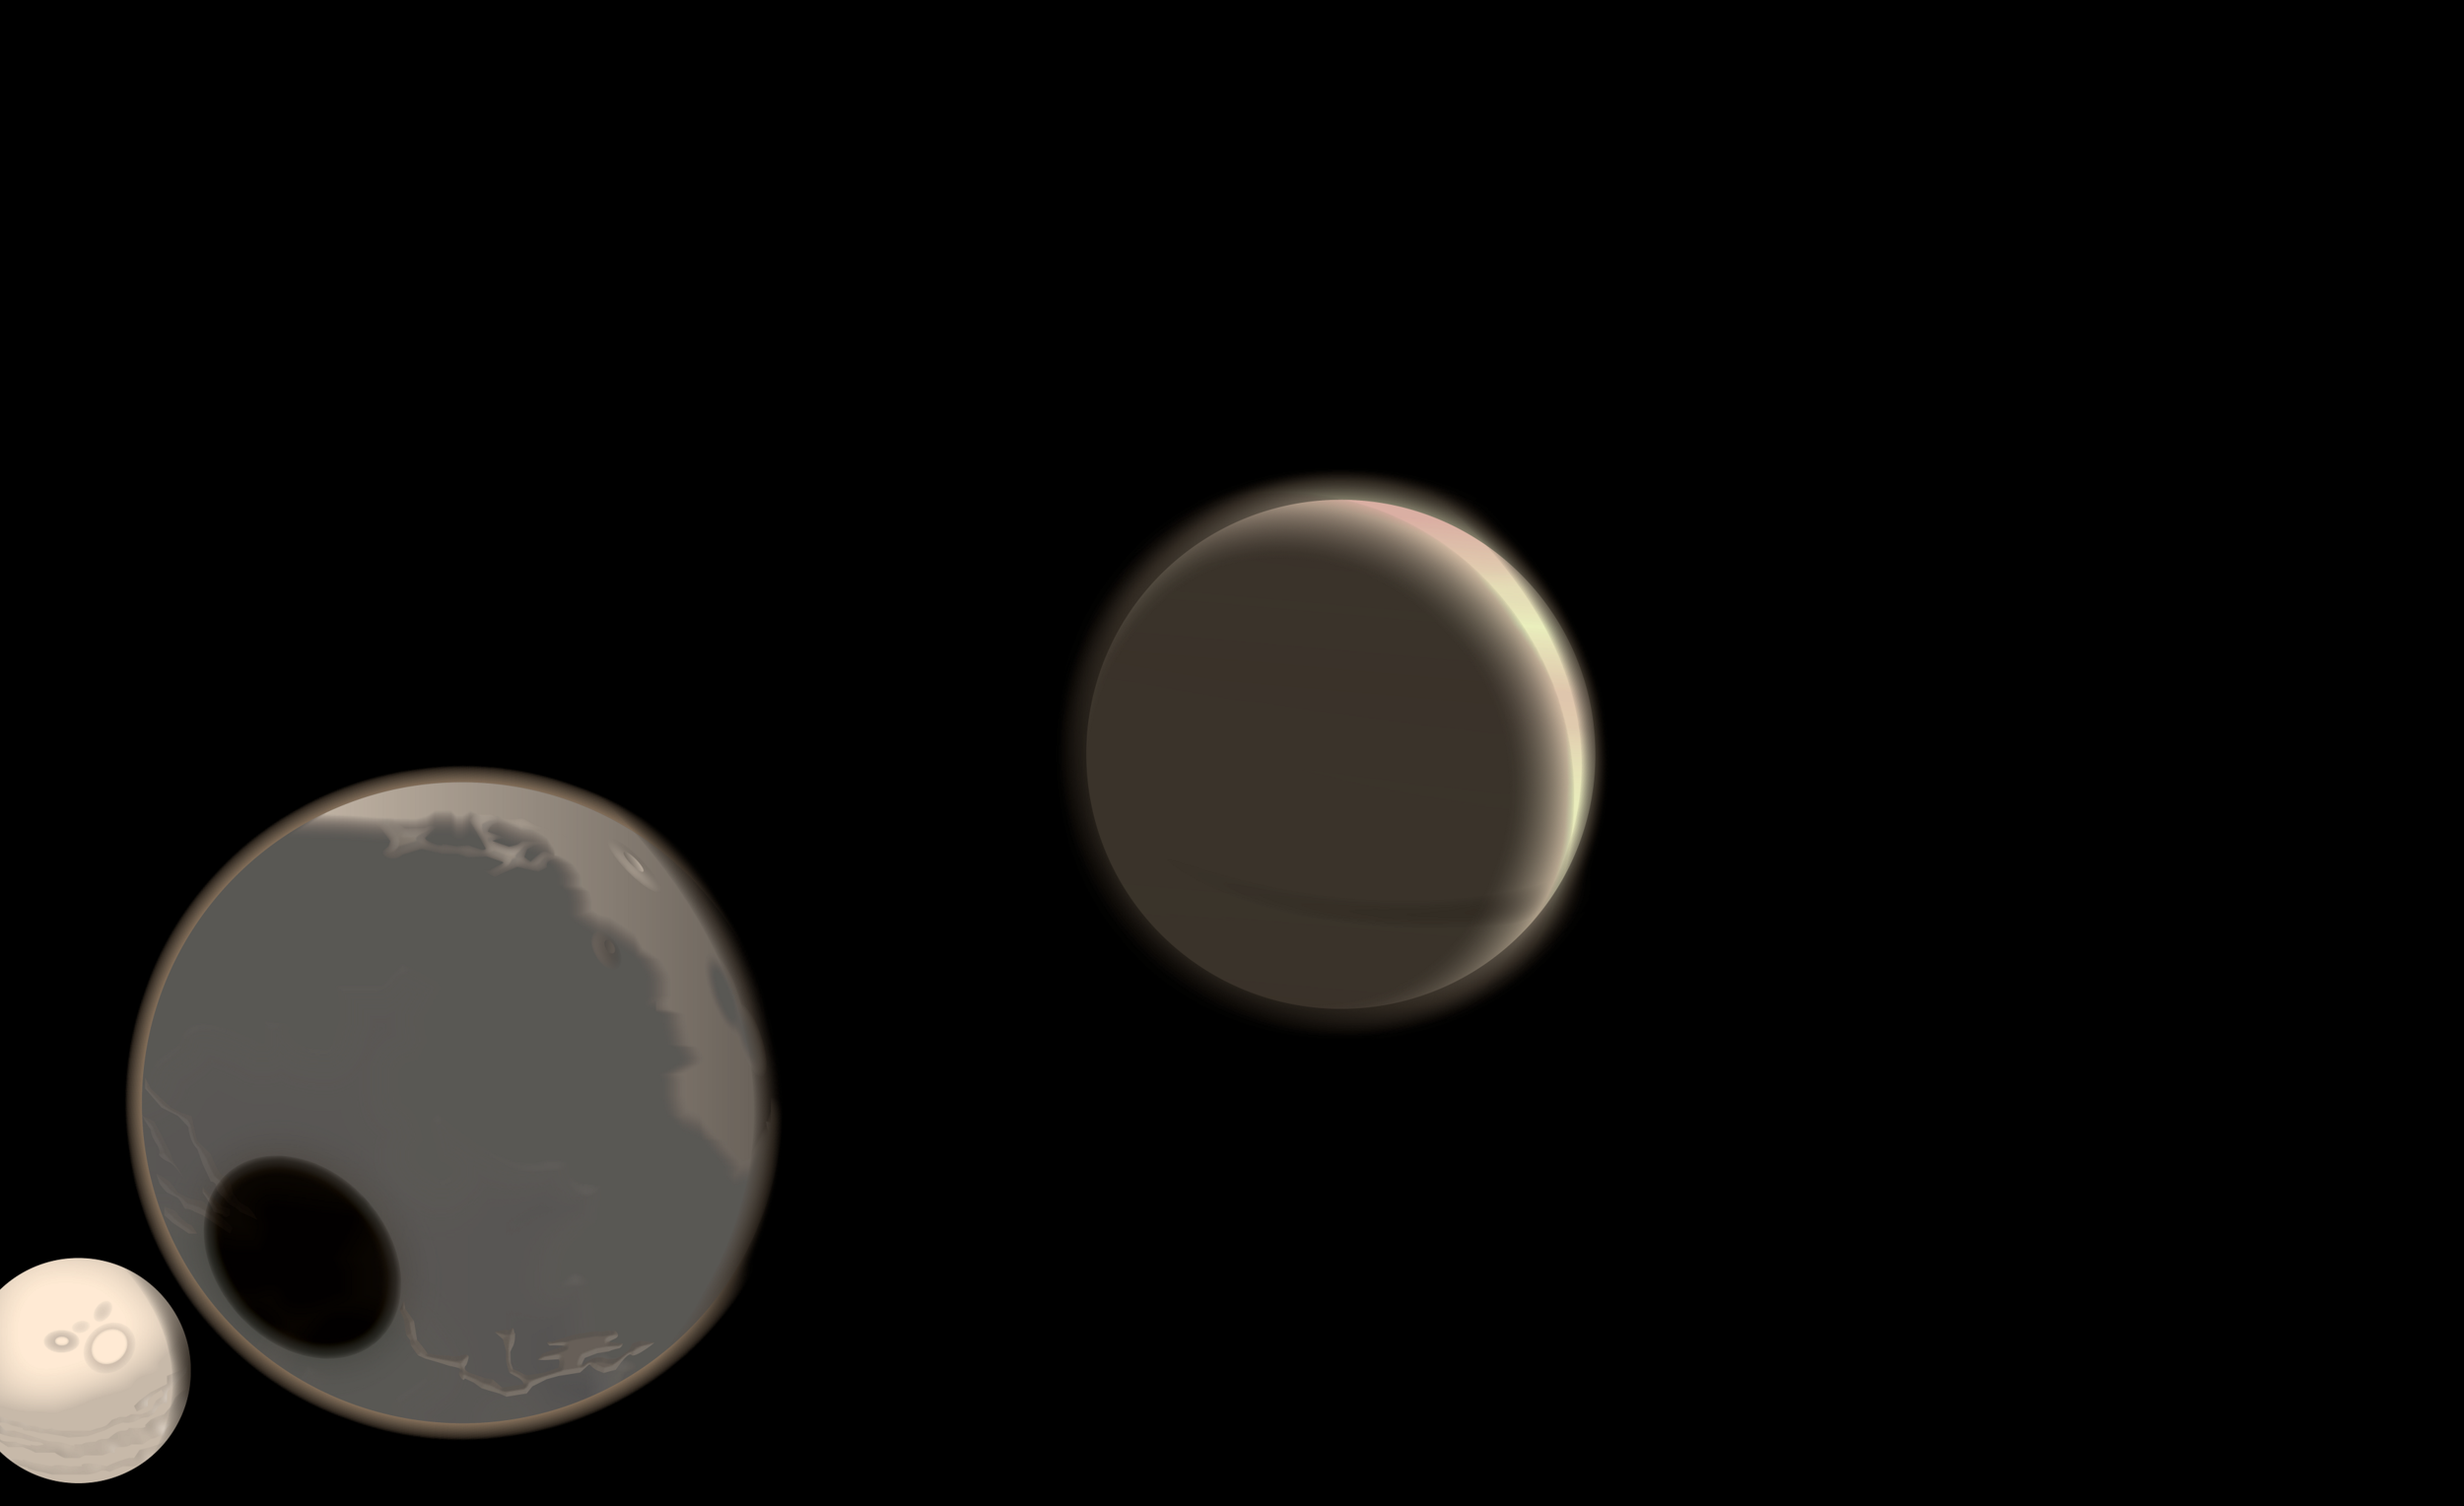  Impendia (center) and two of its three moons, Umud (center left), and Umdu (far left), where vast equatorial 'tide-mining' is carried out and aided by the huge gravitational pull between the two moons. 